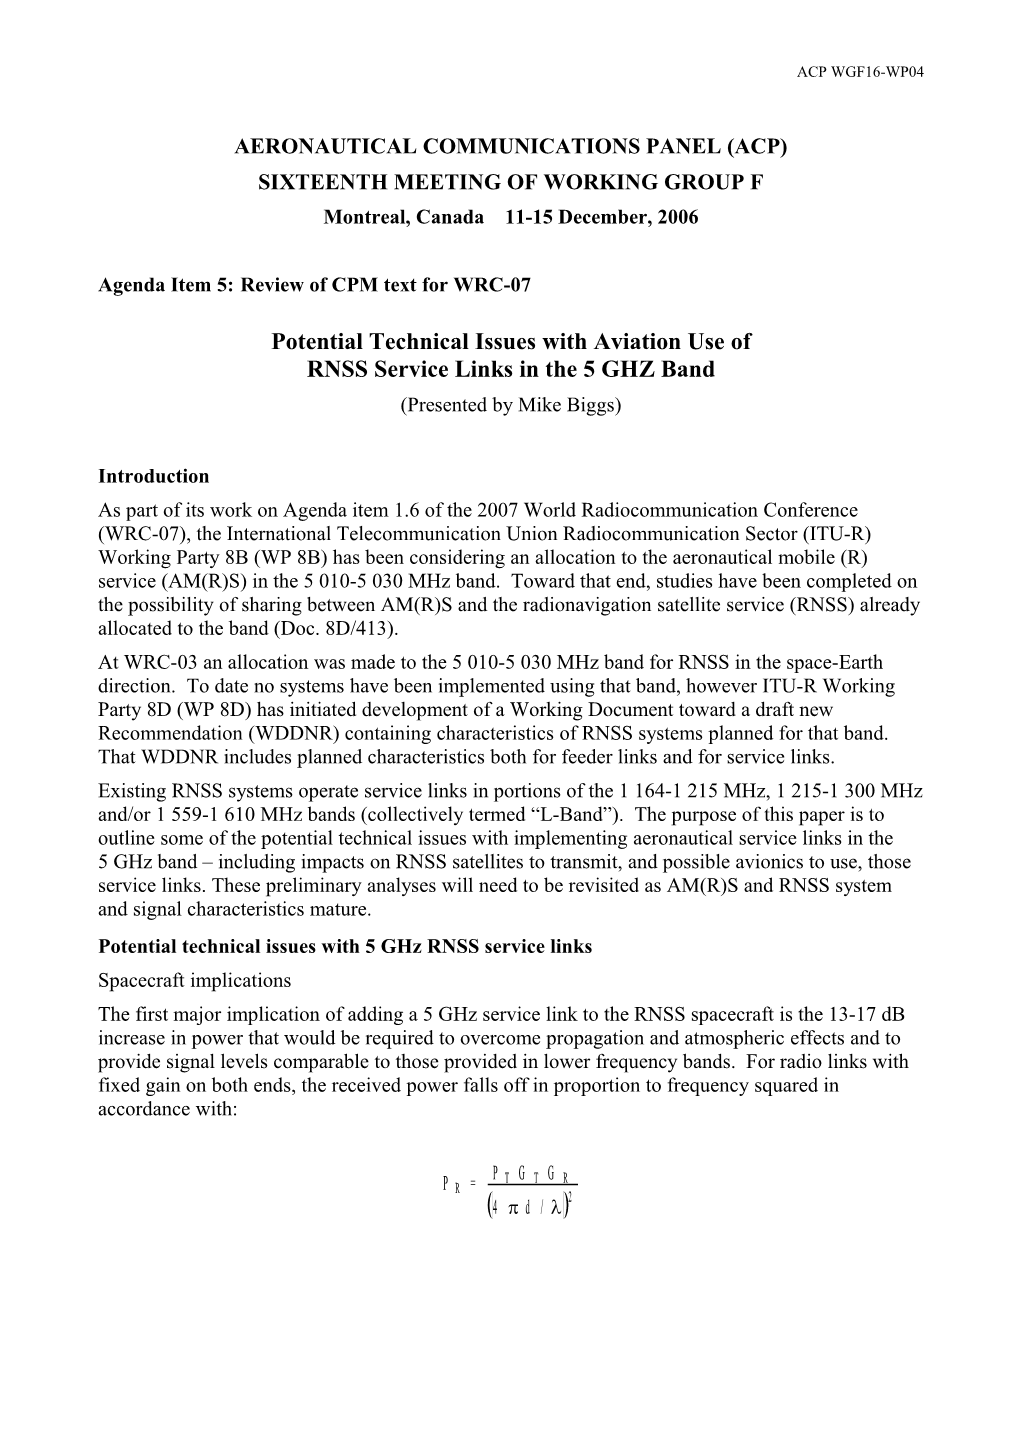 Potential Technical Issues with Aviation Use of RNSS Service Links in the 5 Ghz Band